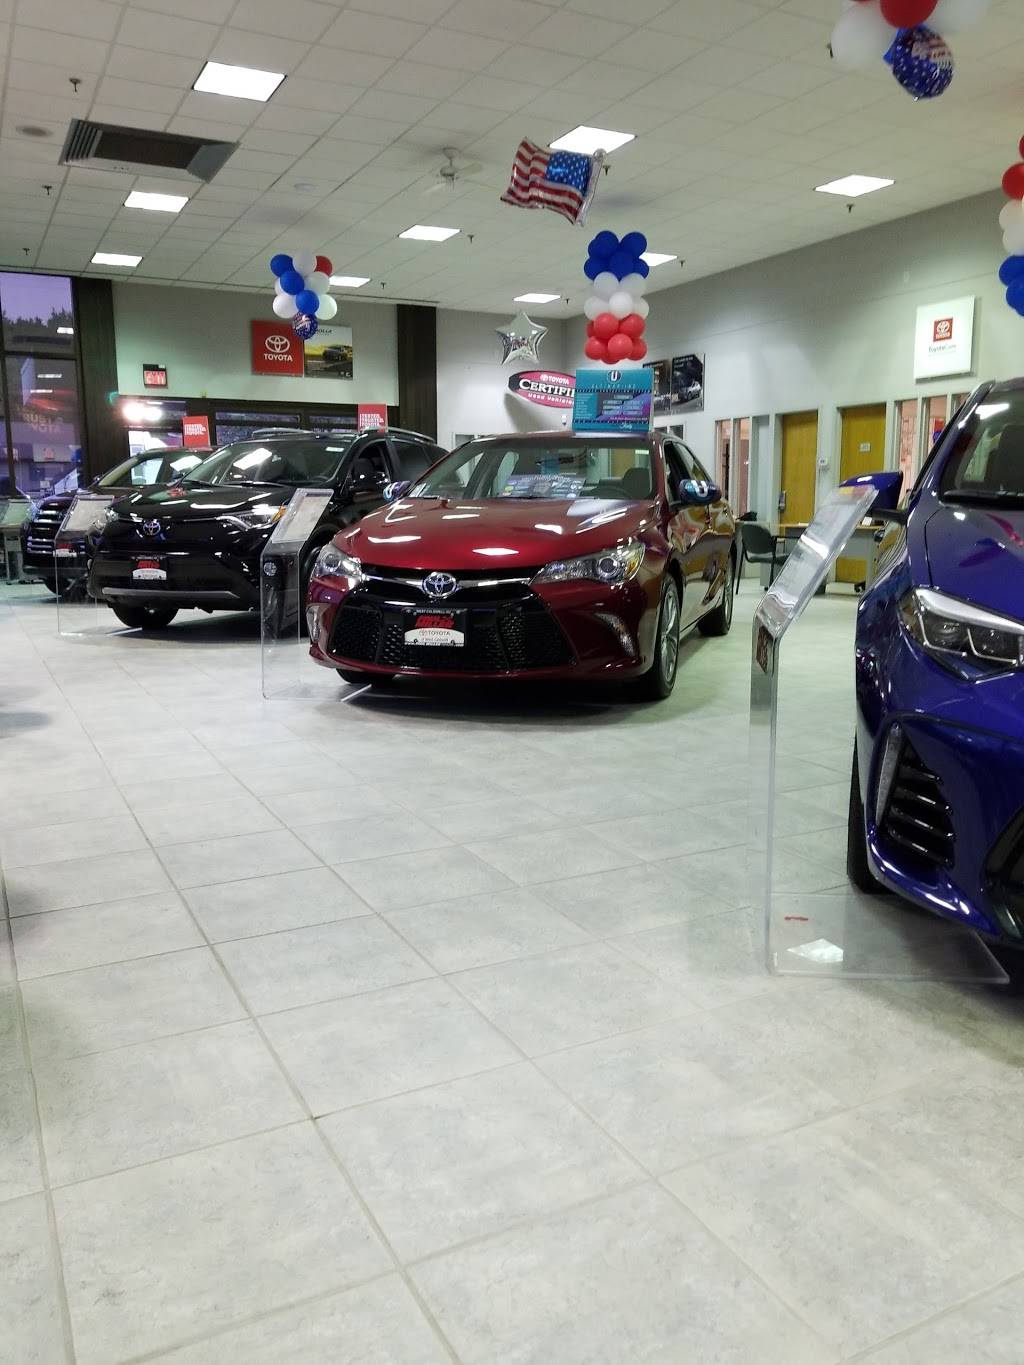 Paul Miller Toyota of West Caldwell | 1155 Bloomfield Ave, West Caldwell, NJ 07006 | Phone: (973) 882-1822